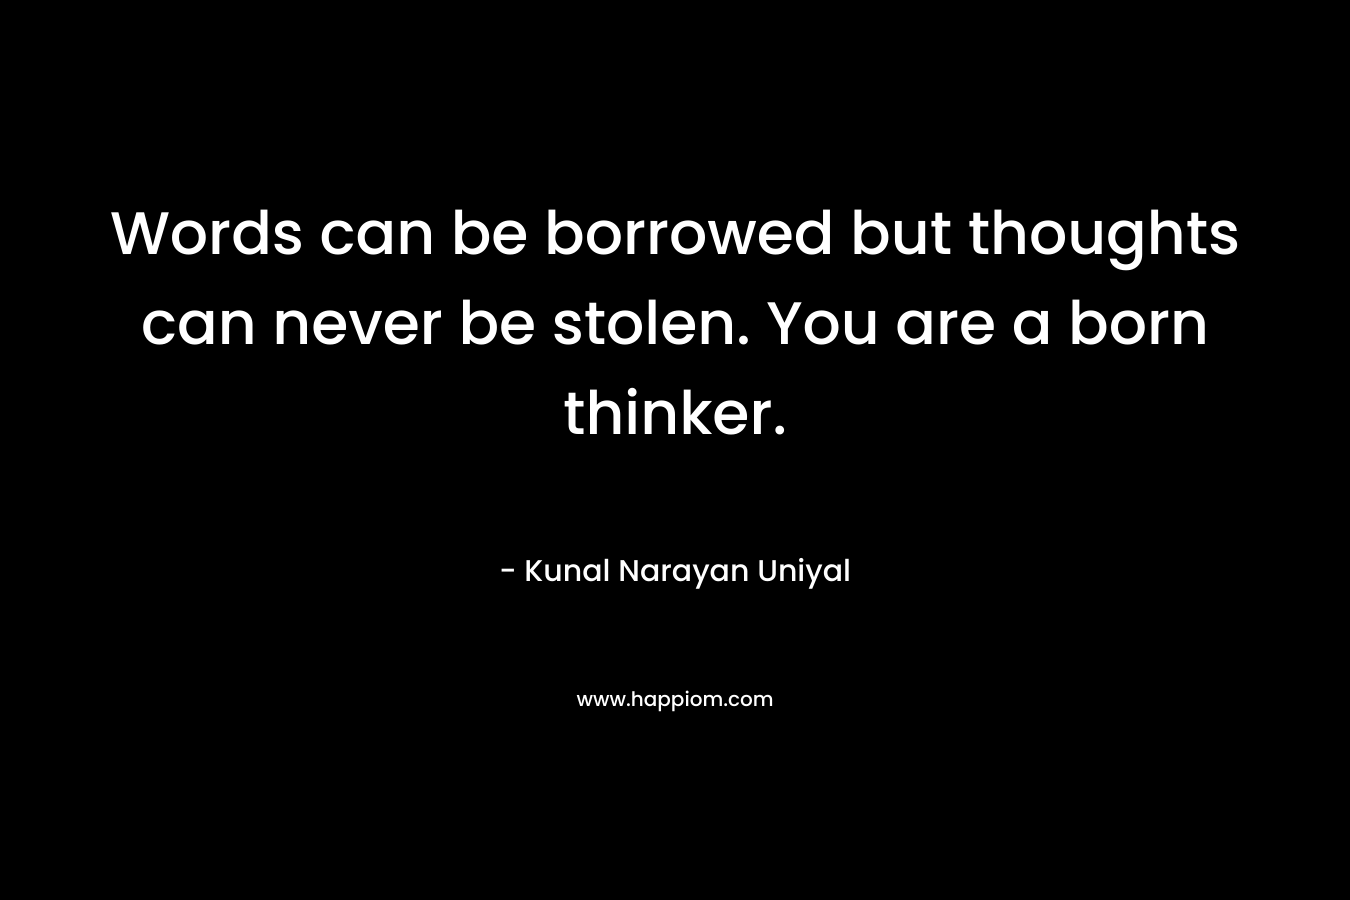 Words can be borrowed but thoughts can never be stolen. You are a born thinker.